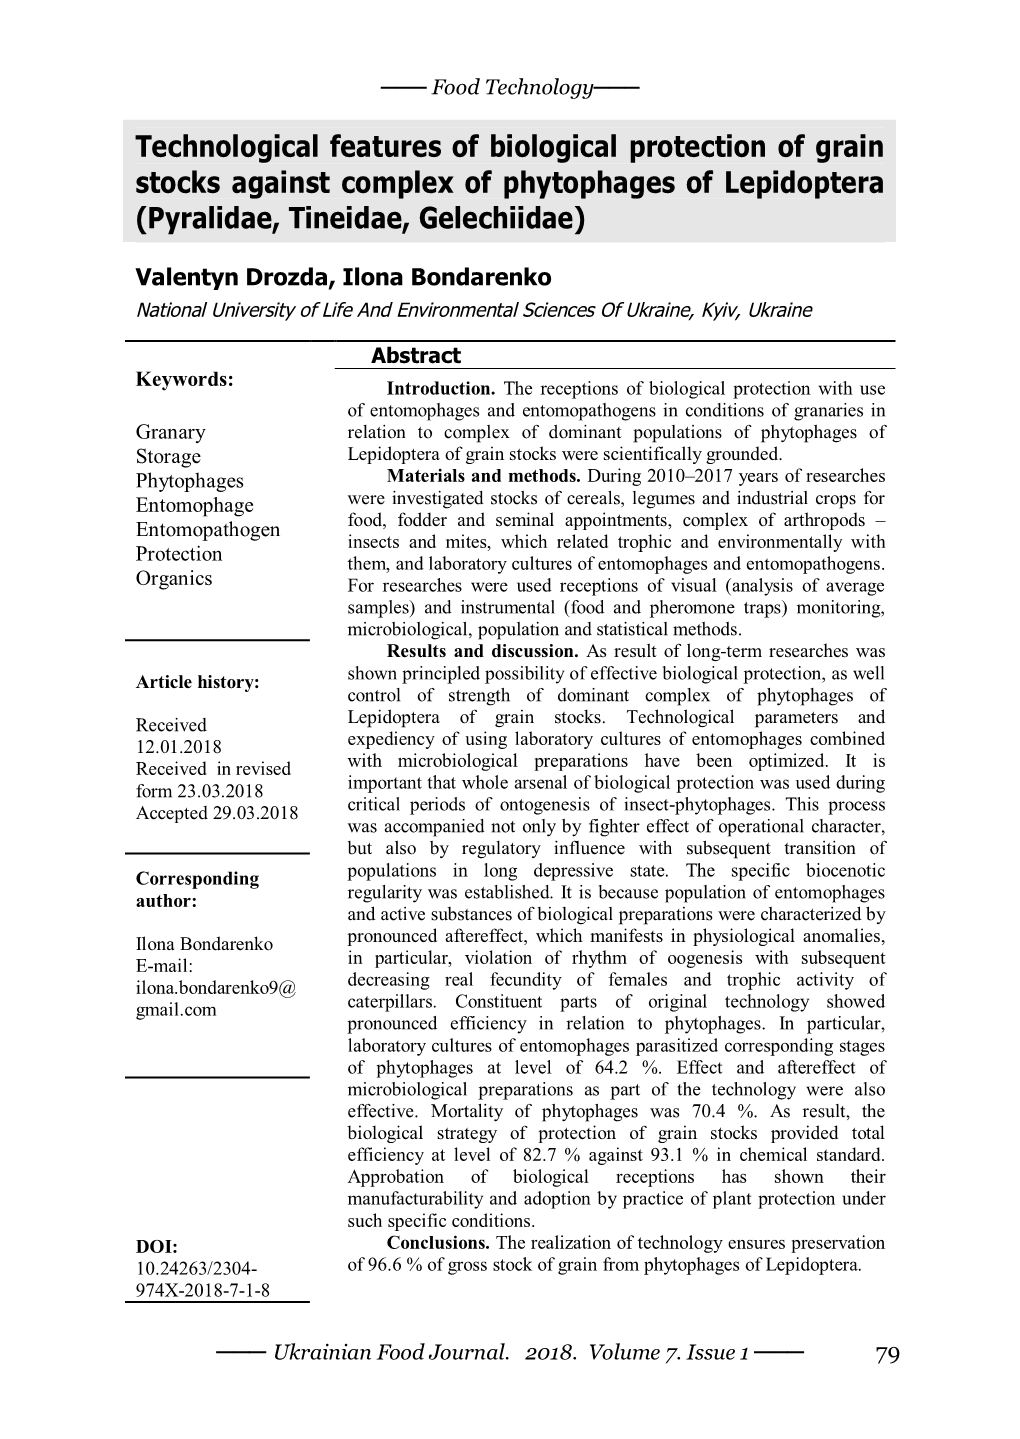 Technological Features of Biological Protection of Grain Stocks Against Complex of Phytophages of Lepidoptera (Pyralidae, Tineidae, Gelechiidae)